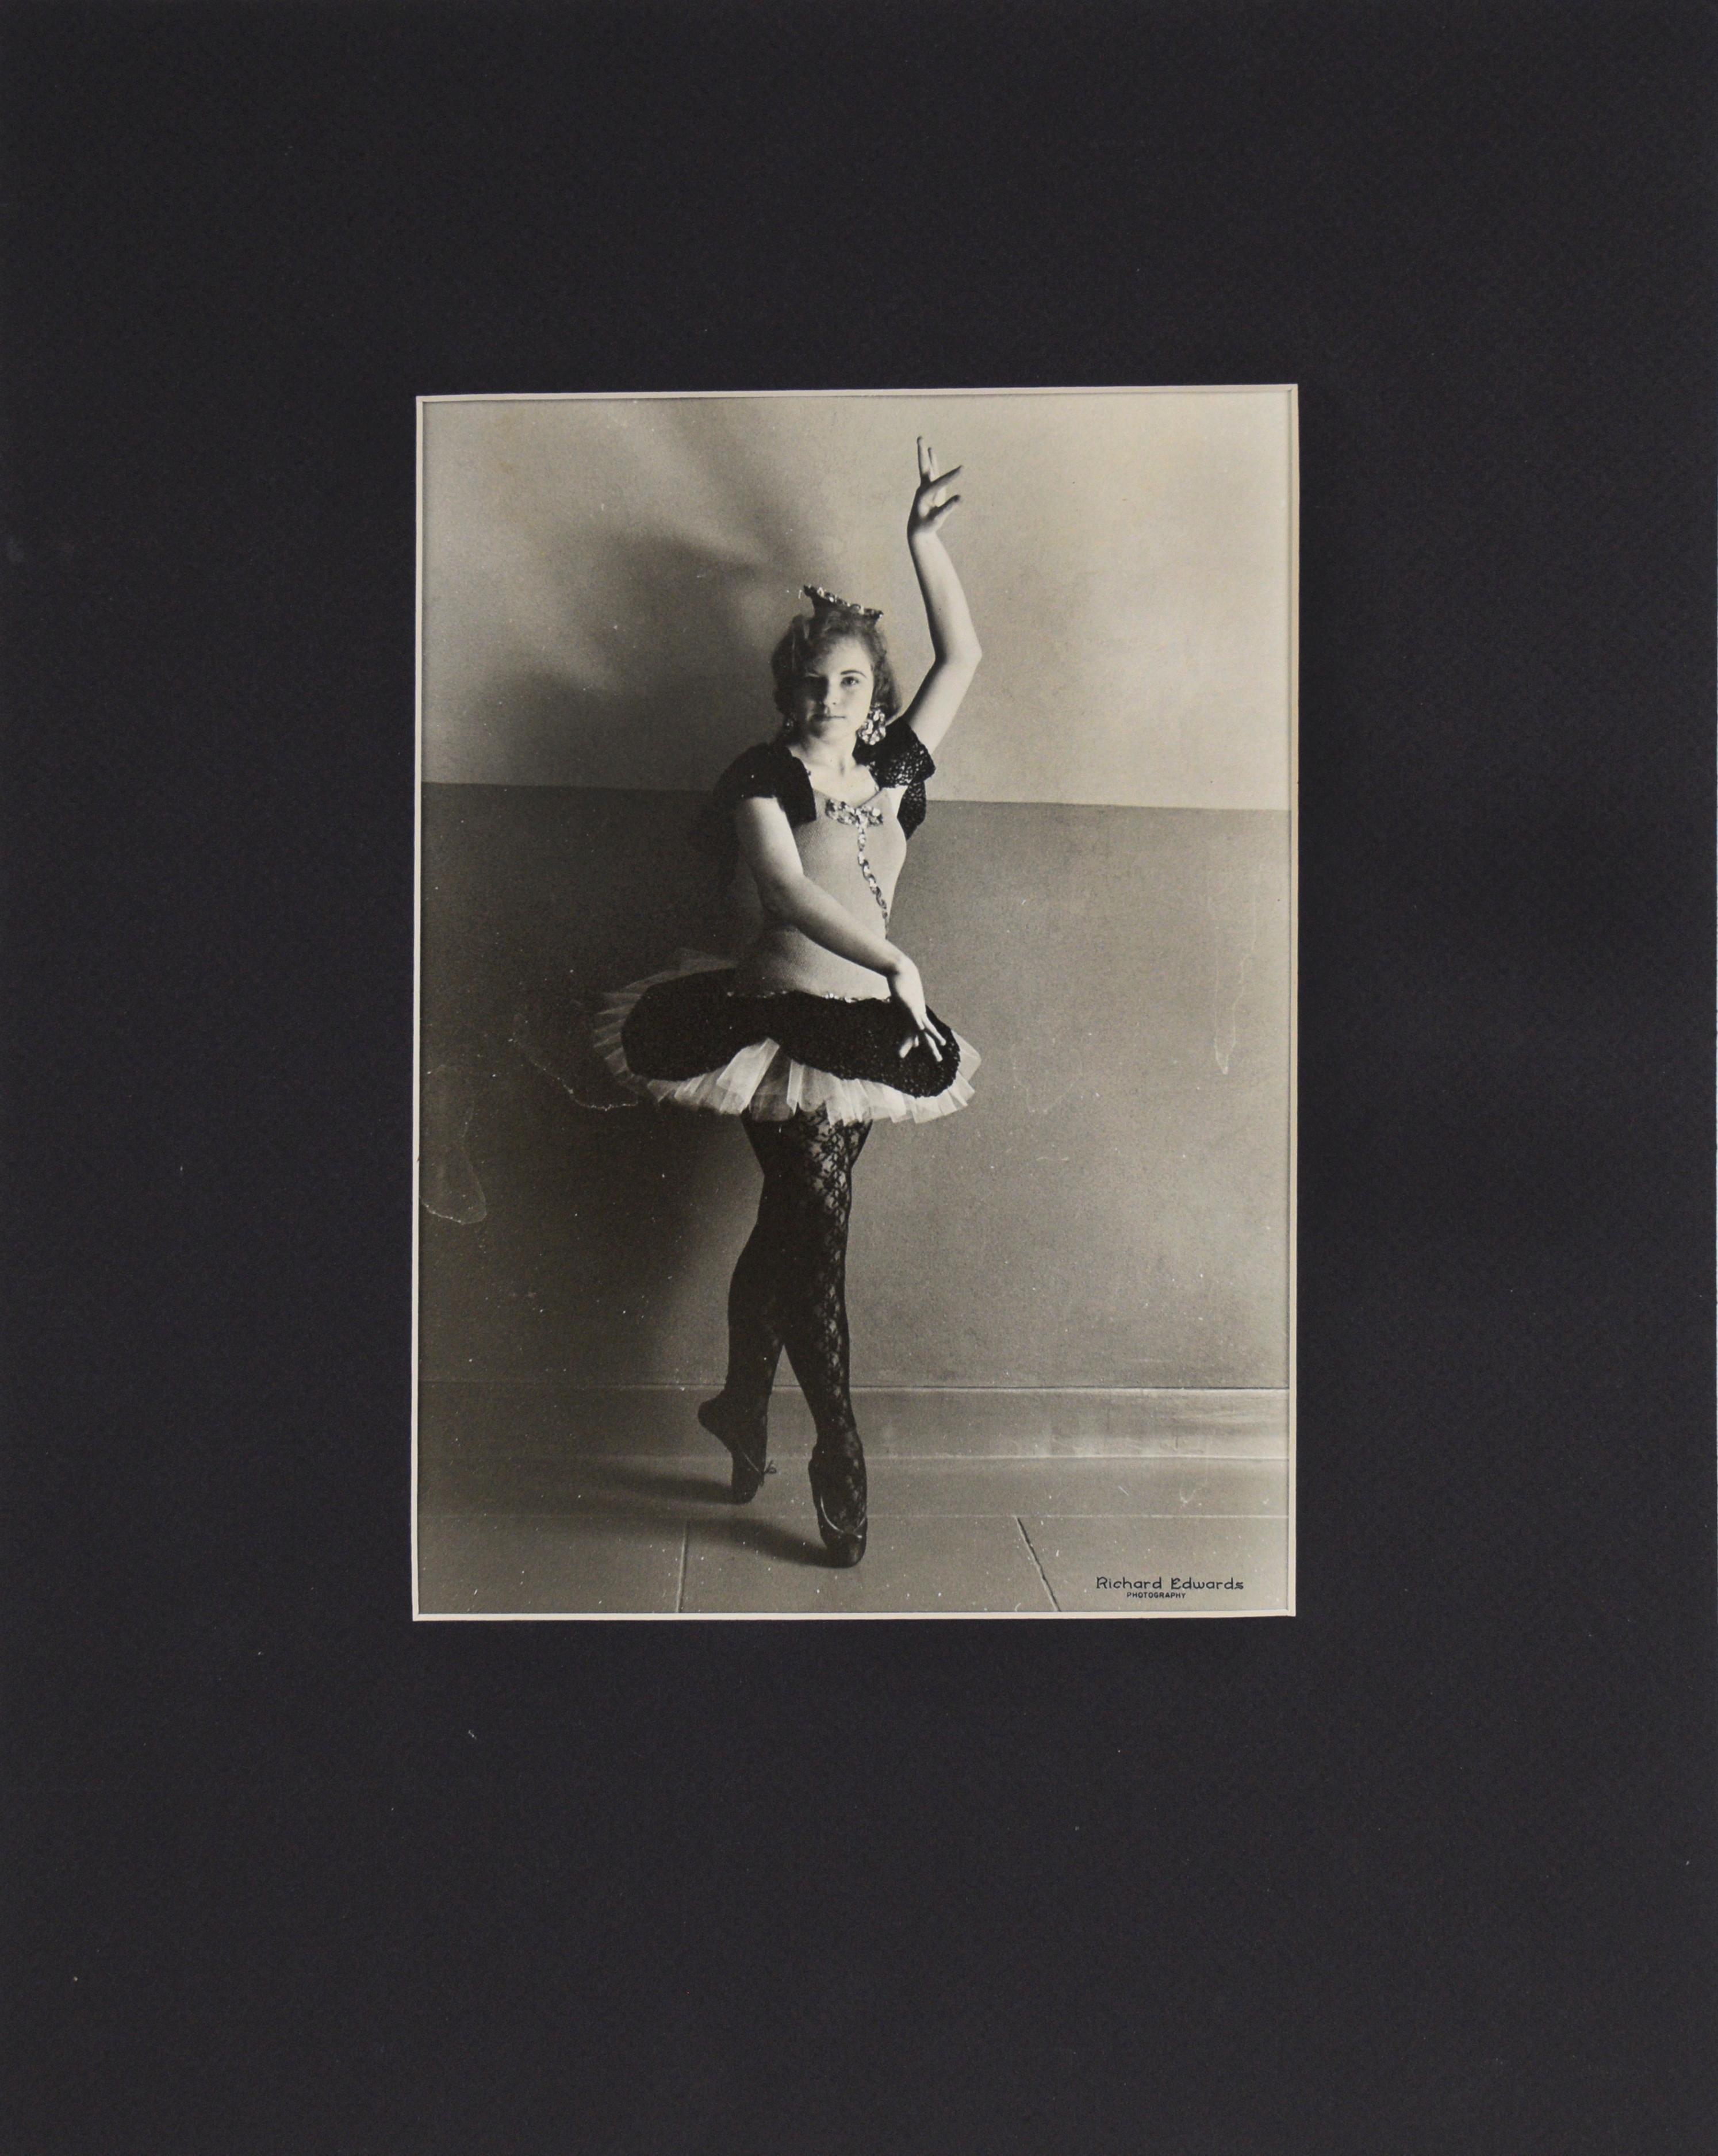 Young Ballerina In Pose San Francisco Richard Edwards

Photo of a young ballerina posing. She is holding her right hand above her head, while her left hand is posed in front of her. The young girl is wearing a black and white tutu, a black lace